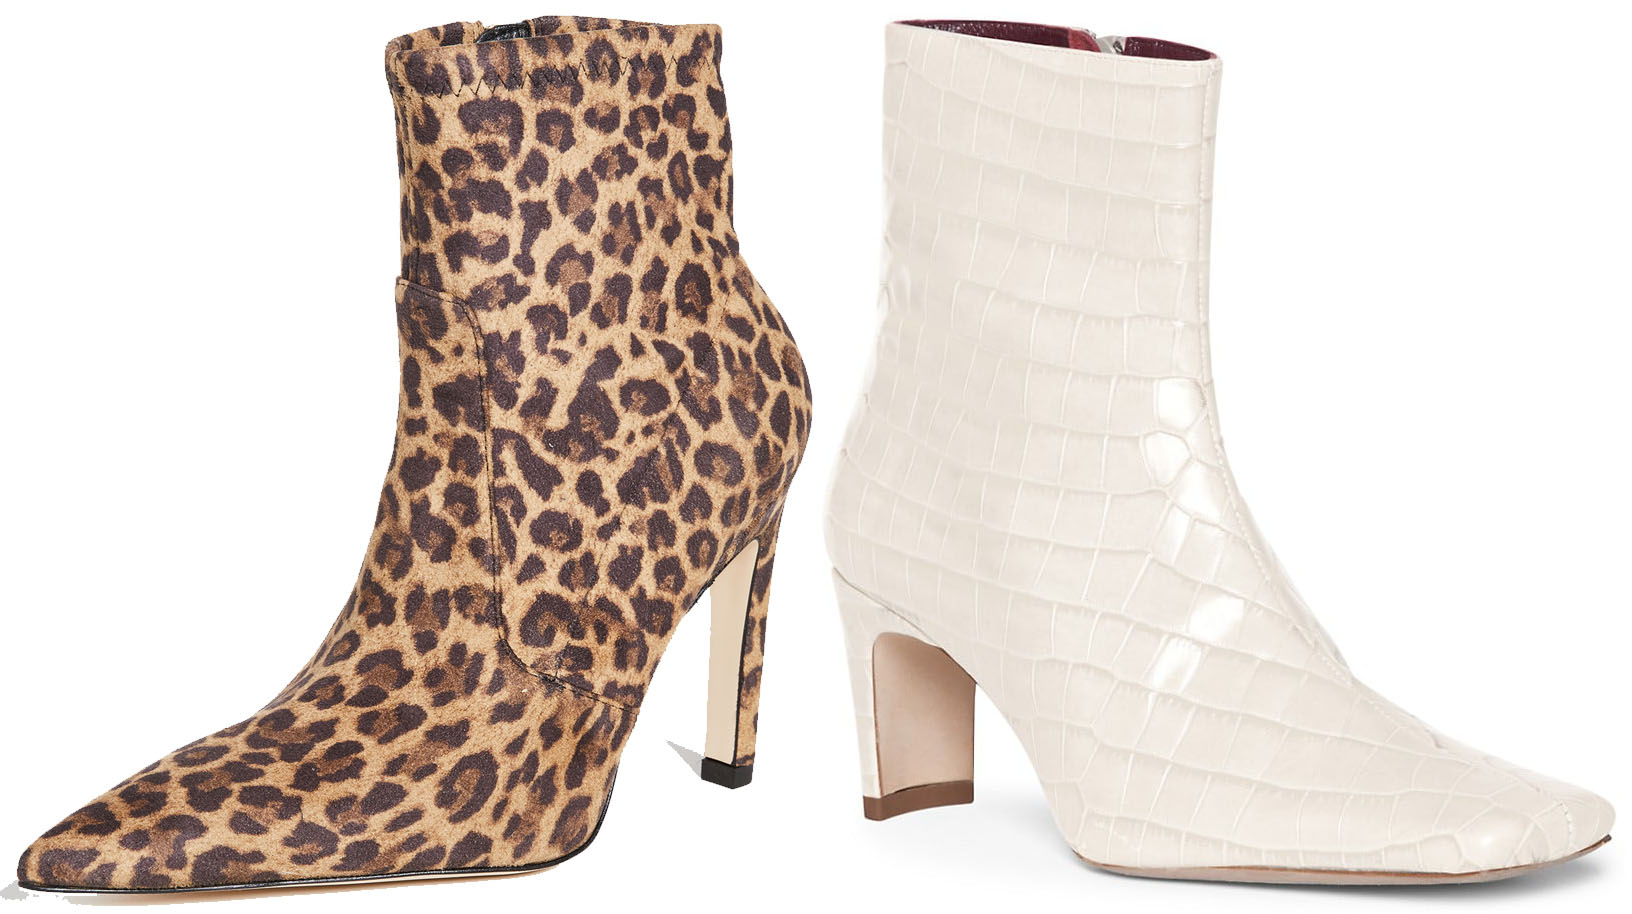 Bold prints and textured ankle booties work all year round